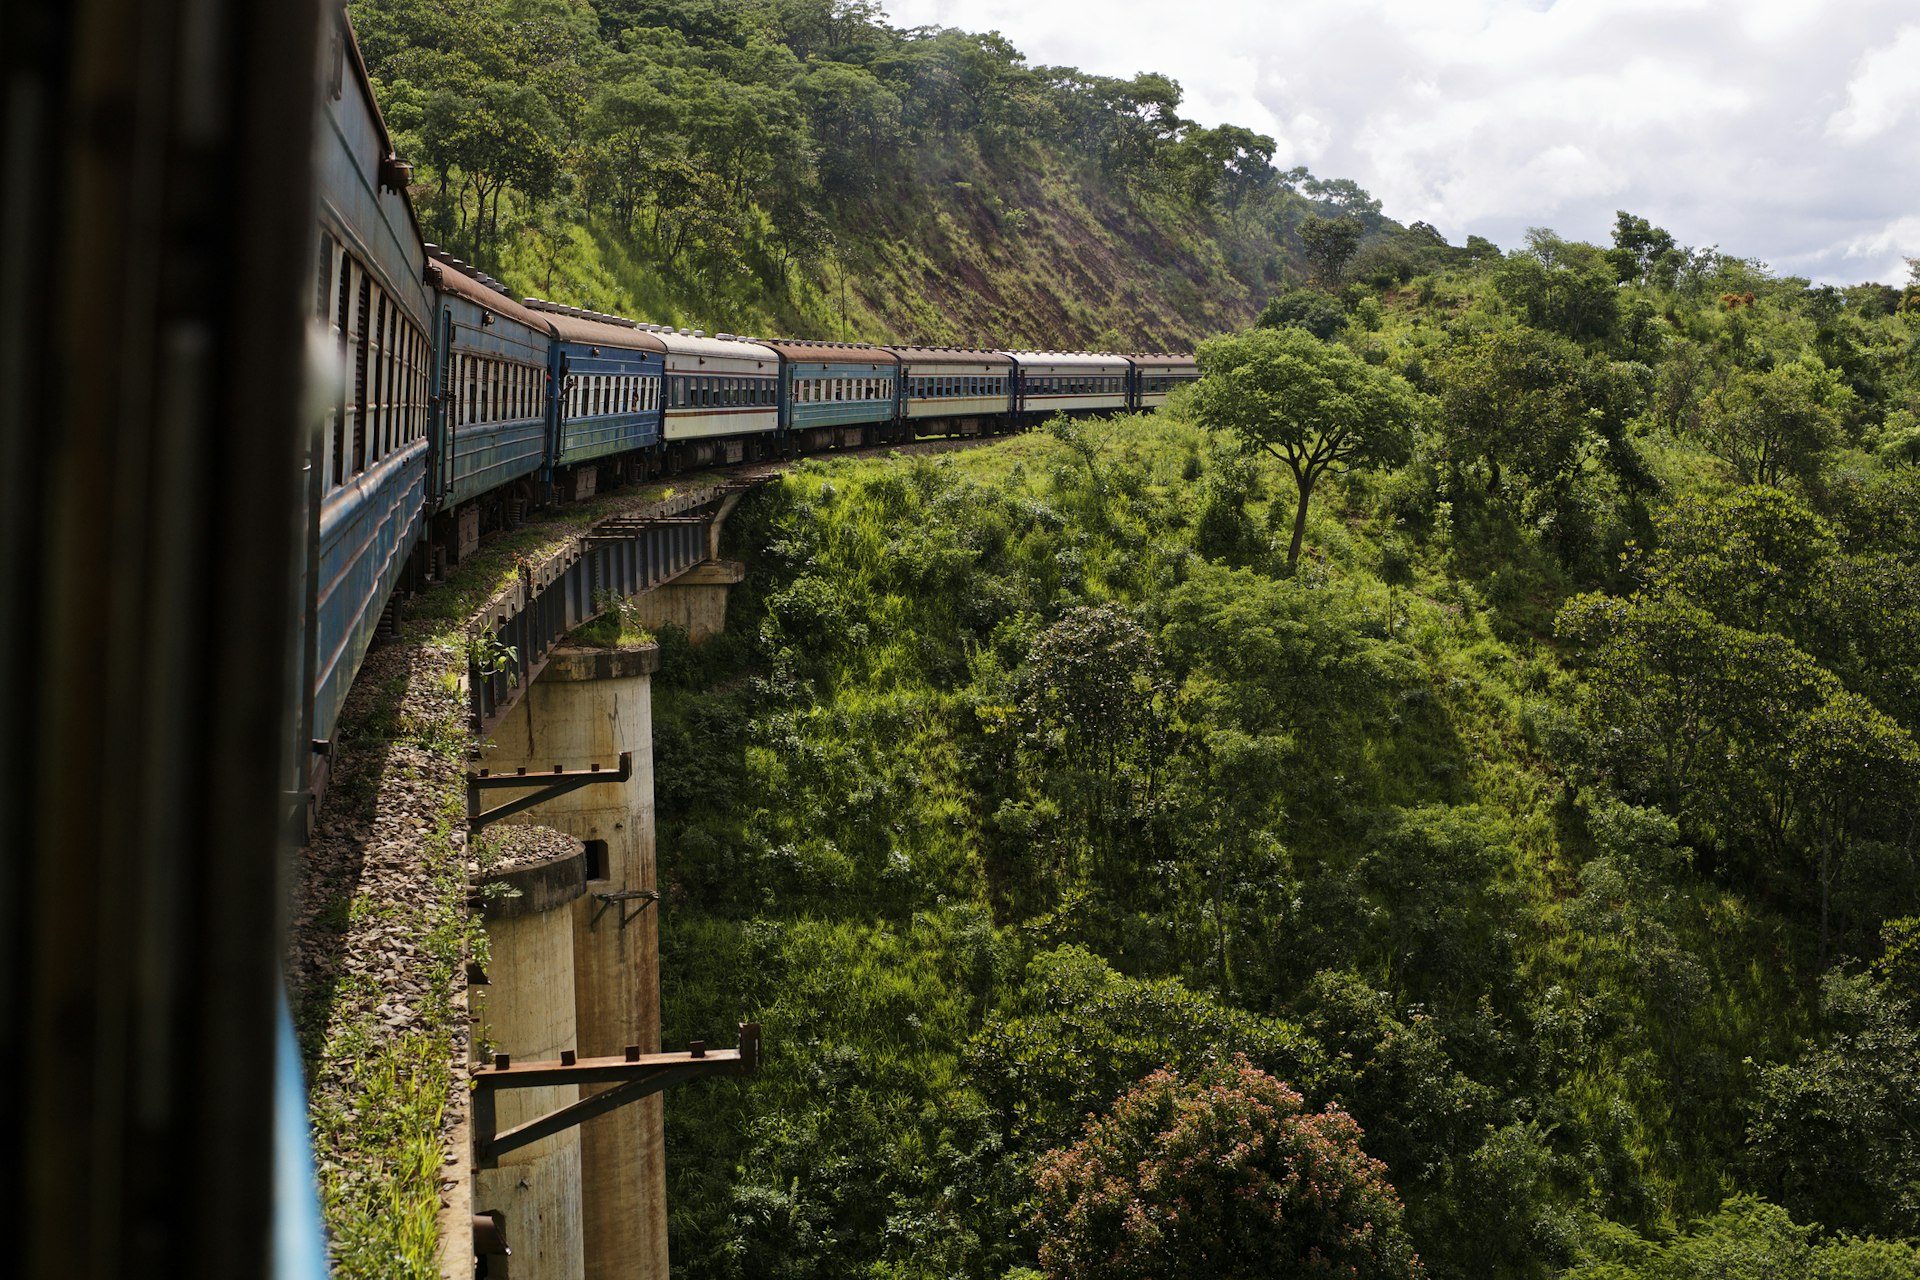 A train travels on a high track over a valley in a lush forest. 